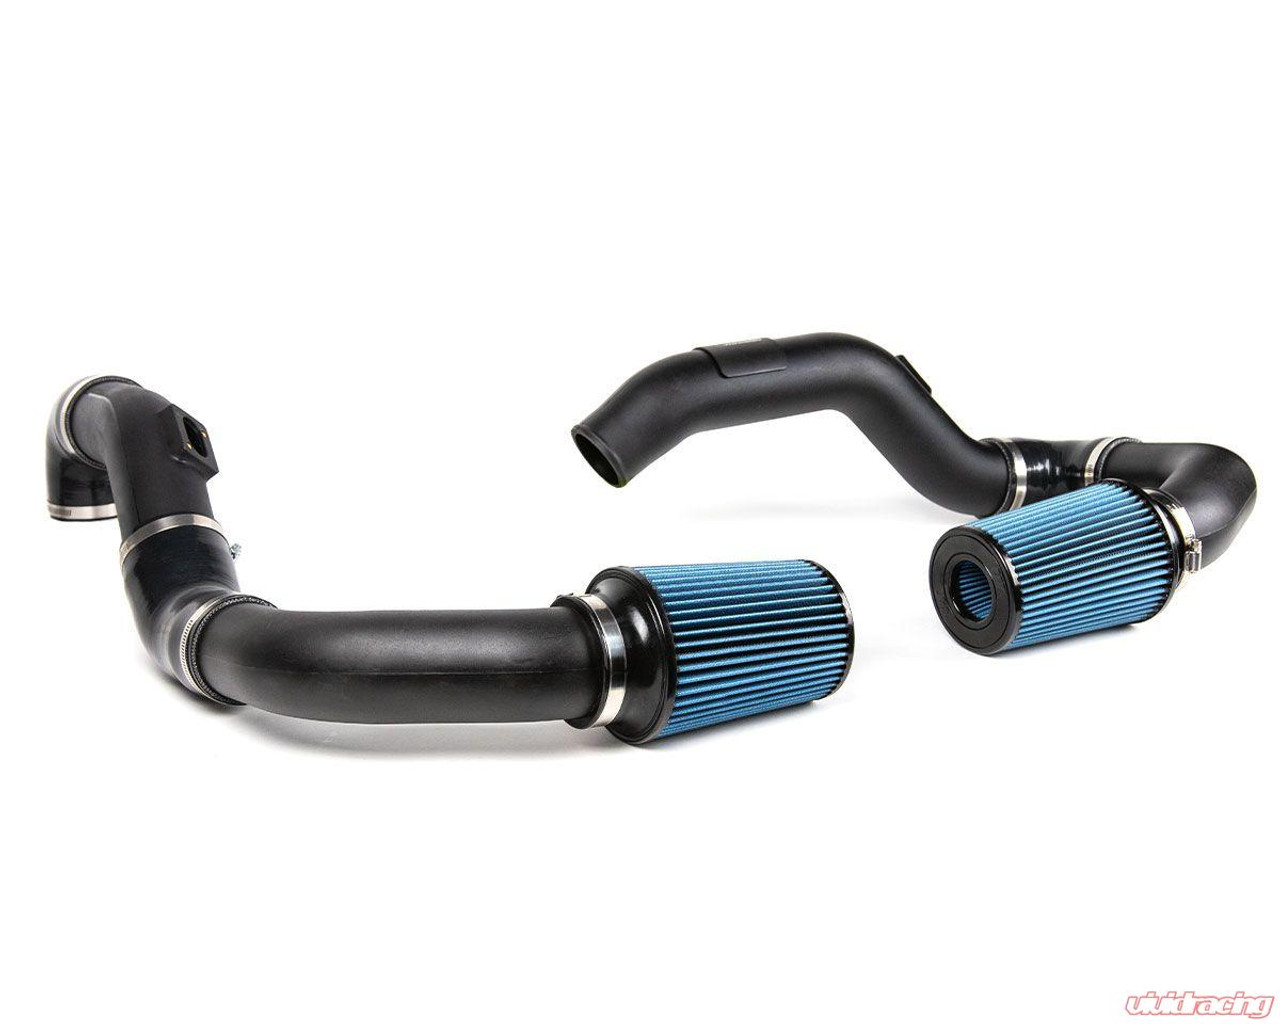 VR PERFORMANCE BMW M3 F80/M4 F82/F83 FRONT MOUNT AIR INTAKE KIT VRPVR-F80M3-110 extreme power house m3list discount